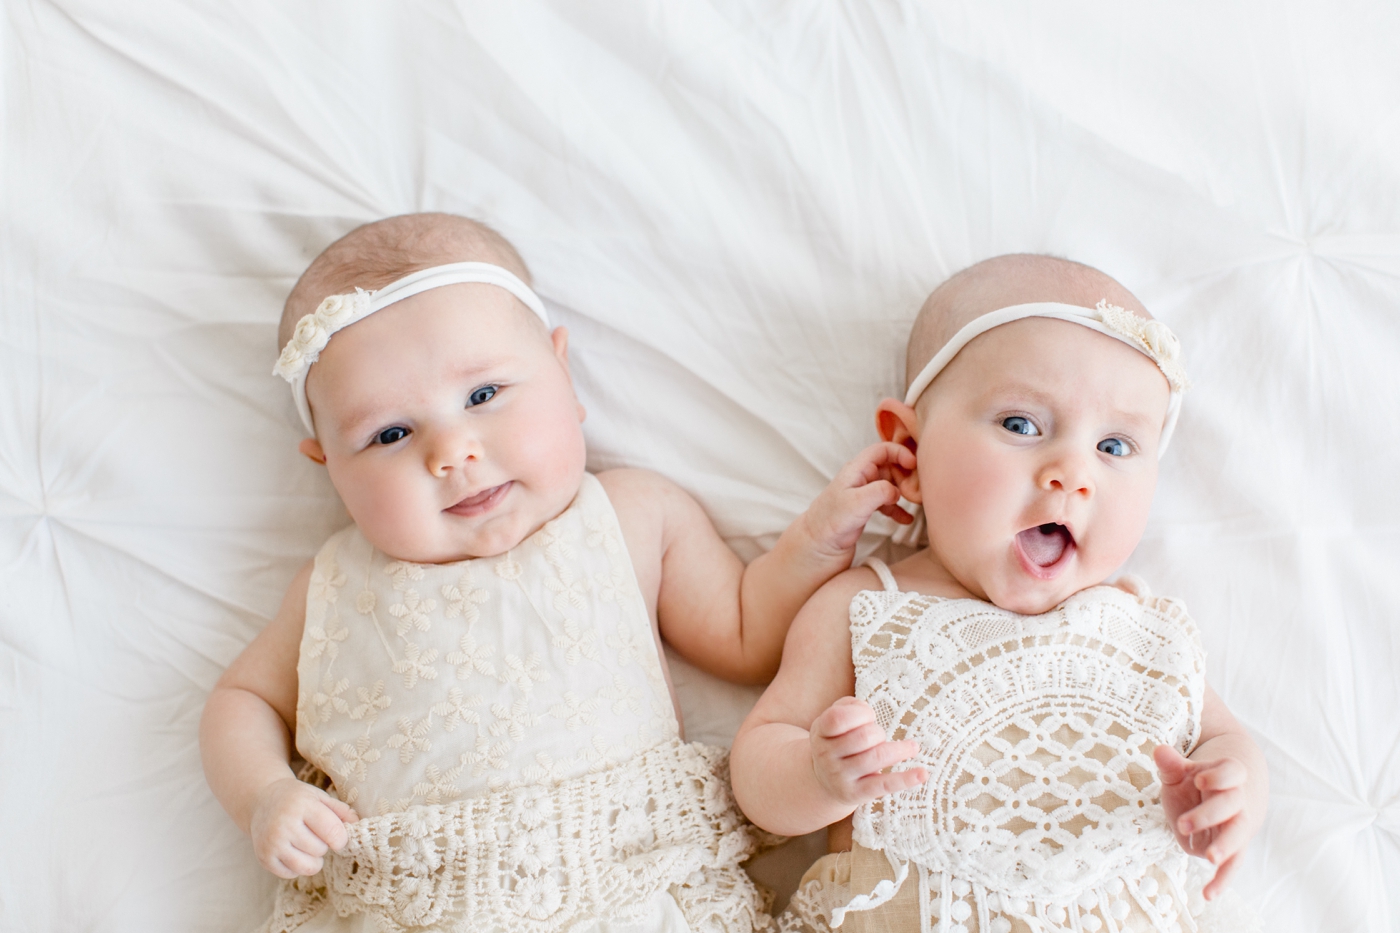 Twin baby girls laying next to each other on bed in studio. Photo by Sana Ahmed Photography.